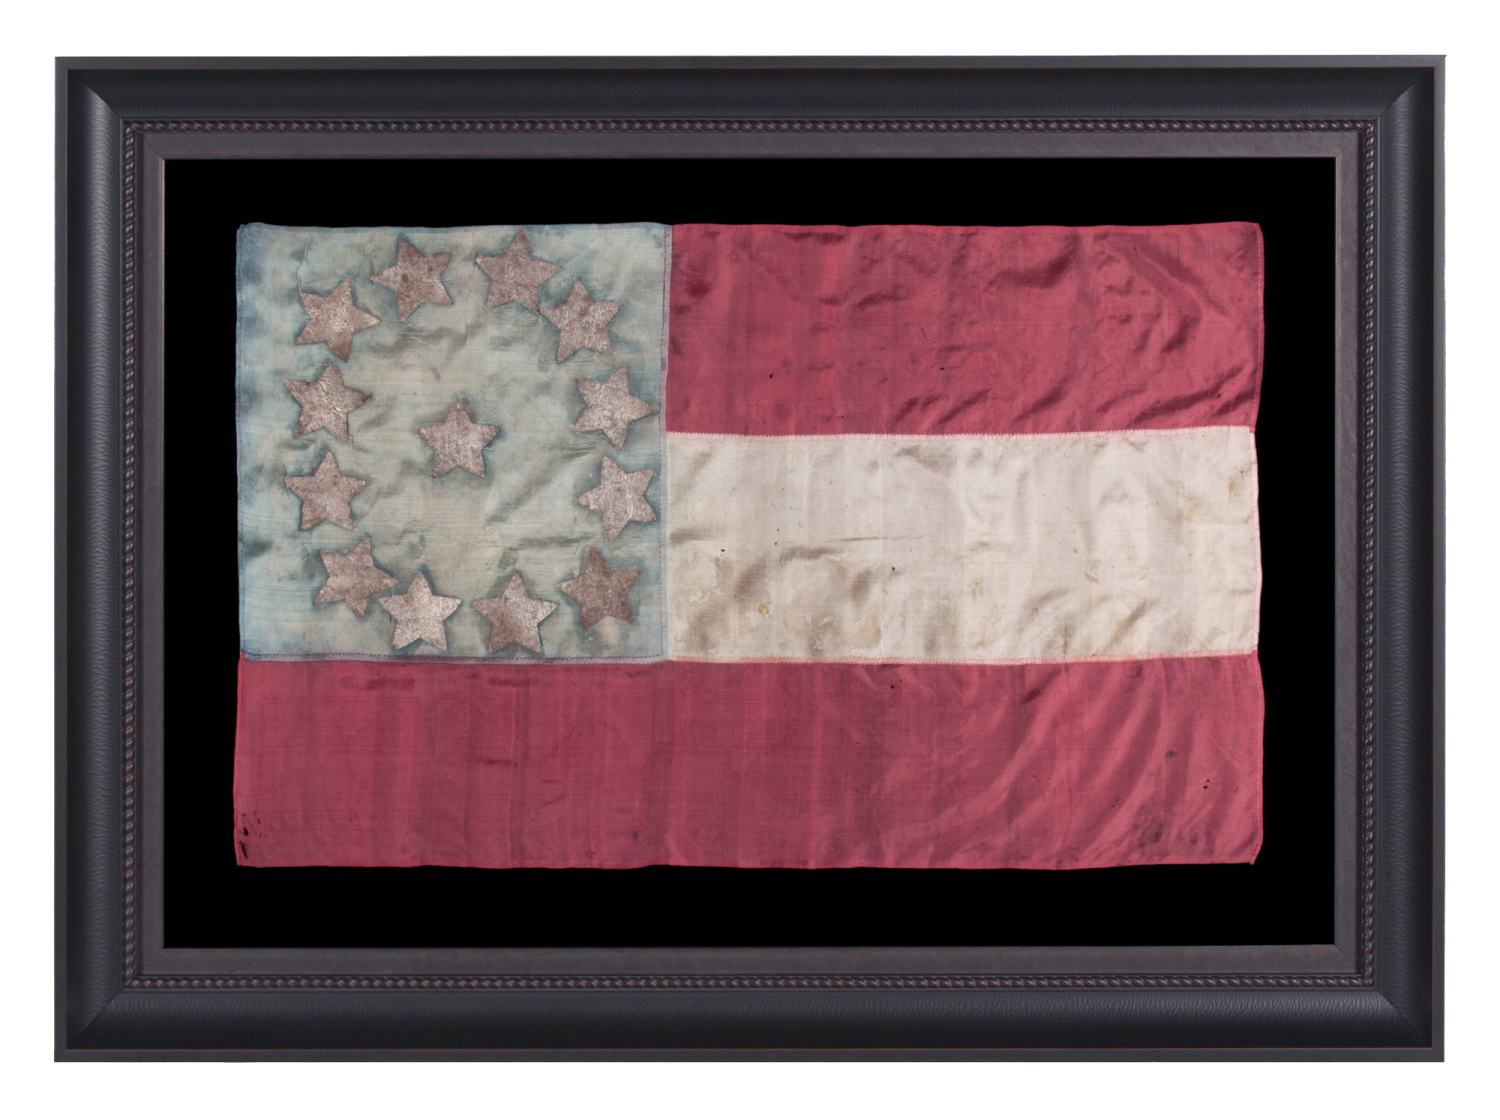 EXTRAORDINARY, HOMEMADE, 1ST CONFEDERATE NATIONAL FLAG, MADE OF LADIES’ DRESS SILK, WITH BEAUTIFUL COLORS AND EXCEPTIONAL PRESSED FOIL STARS, POSSIBLY OF NORTH CAROLINA ORIGIN; LIKELY PRESENTED TO AN OFFICER BY A LOVED ONE AND SEEMINGLY DISPLAYED THEREAFTER AS CONDITIONS PERMITTED; CAPTURED OR SEIZED BY CHAPLAIN-TURNED-GENERAL ELIPHALET WHITTLESEY OF MAINE, A STRONG OPPONENT OF SLAVERY, WHO EVENTUALLY LED AN ALL-BLACK REGIMENT (46TH U.S. COLORED TROOPS)